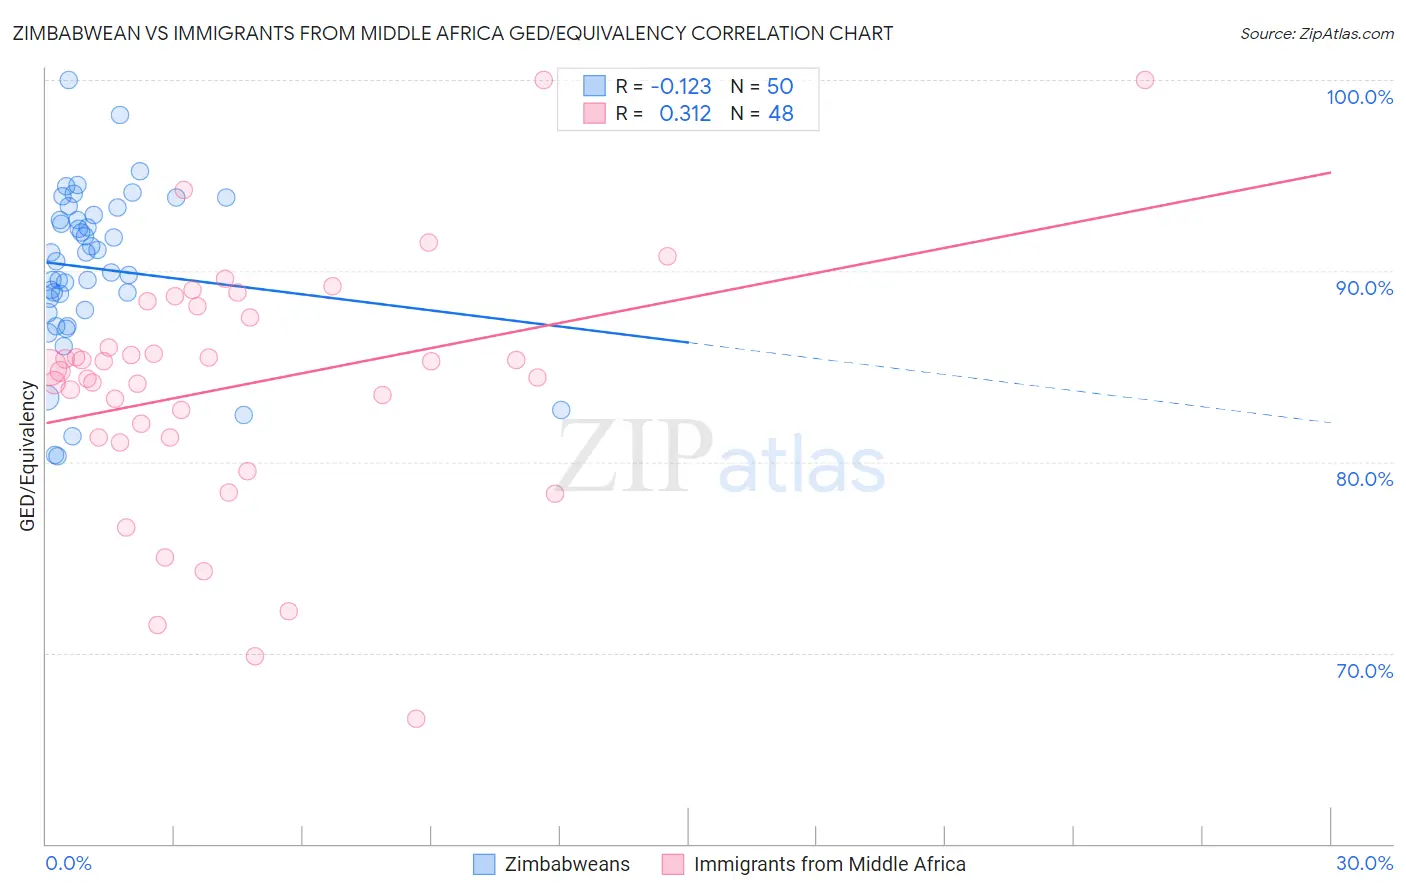 Zimbabwean vs Immigrants from Middle Africa GED/Equivalency